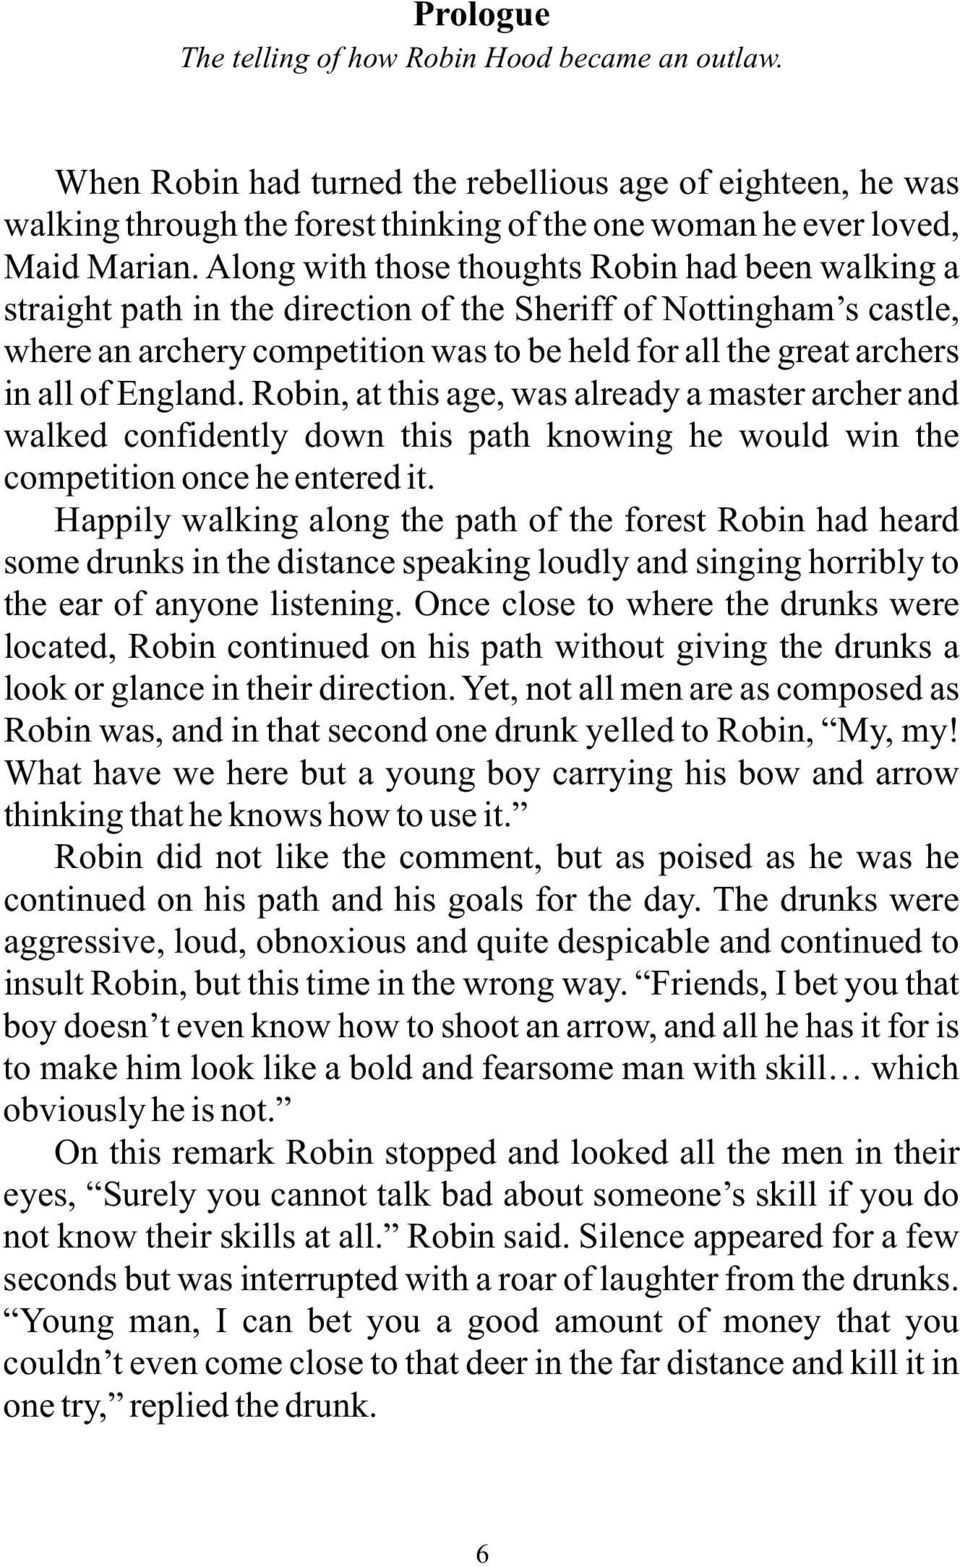 of England. Robin, at this age, was already a master archer and walked confidently down this path knowing he would win the competition once he entered it.